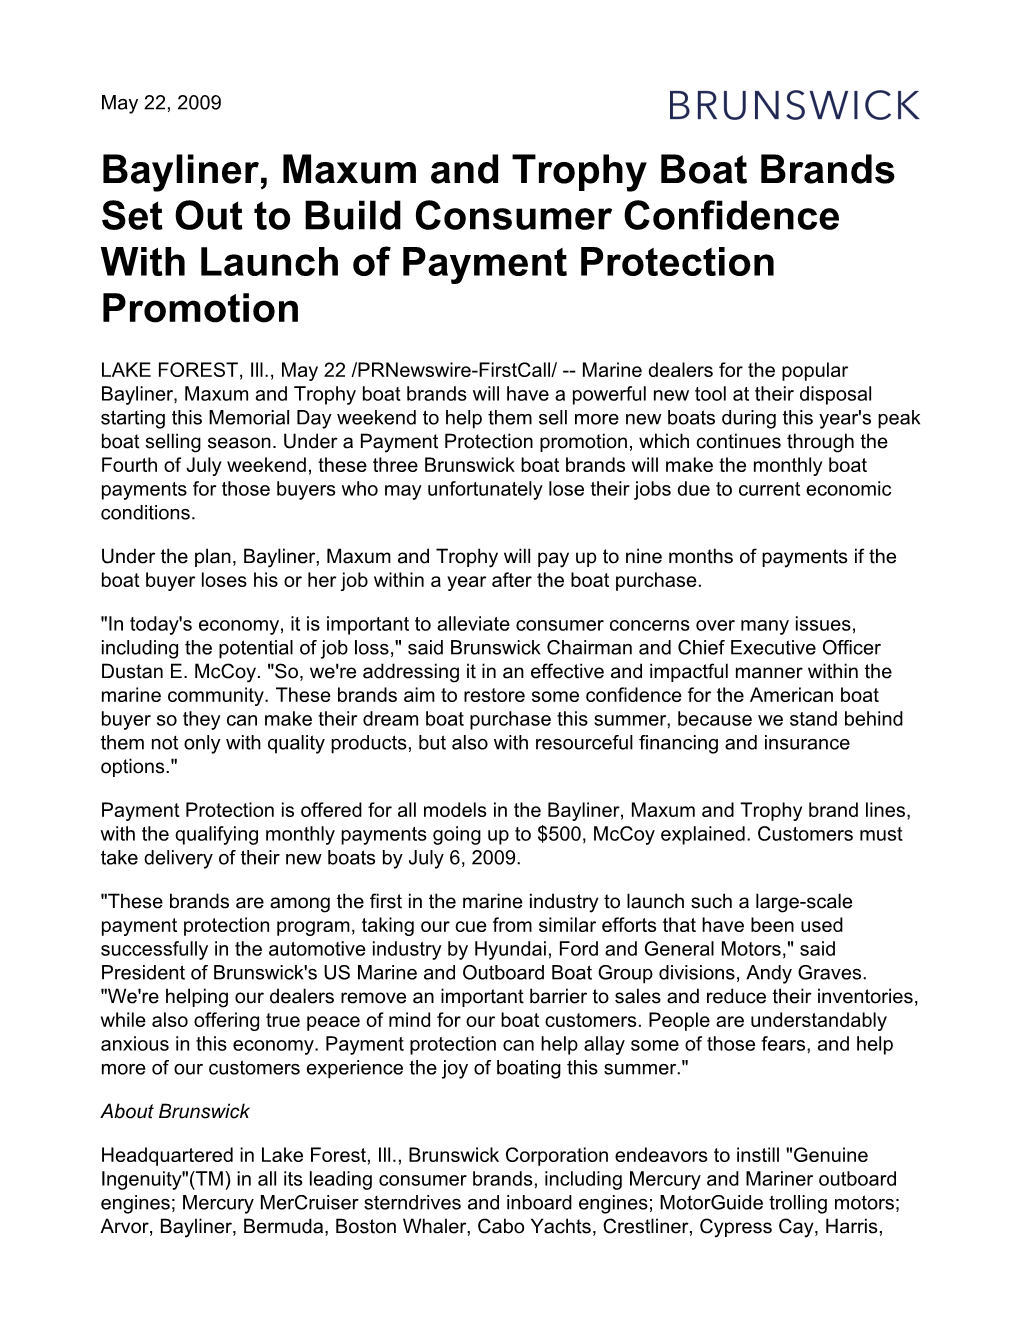 Bayliner, Maxum and Trophy Boat Brands Set out to Build Consumer Confidence with Launch of Payment Protection Promotion